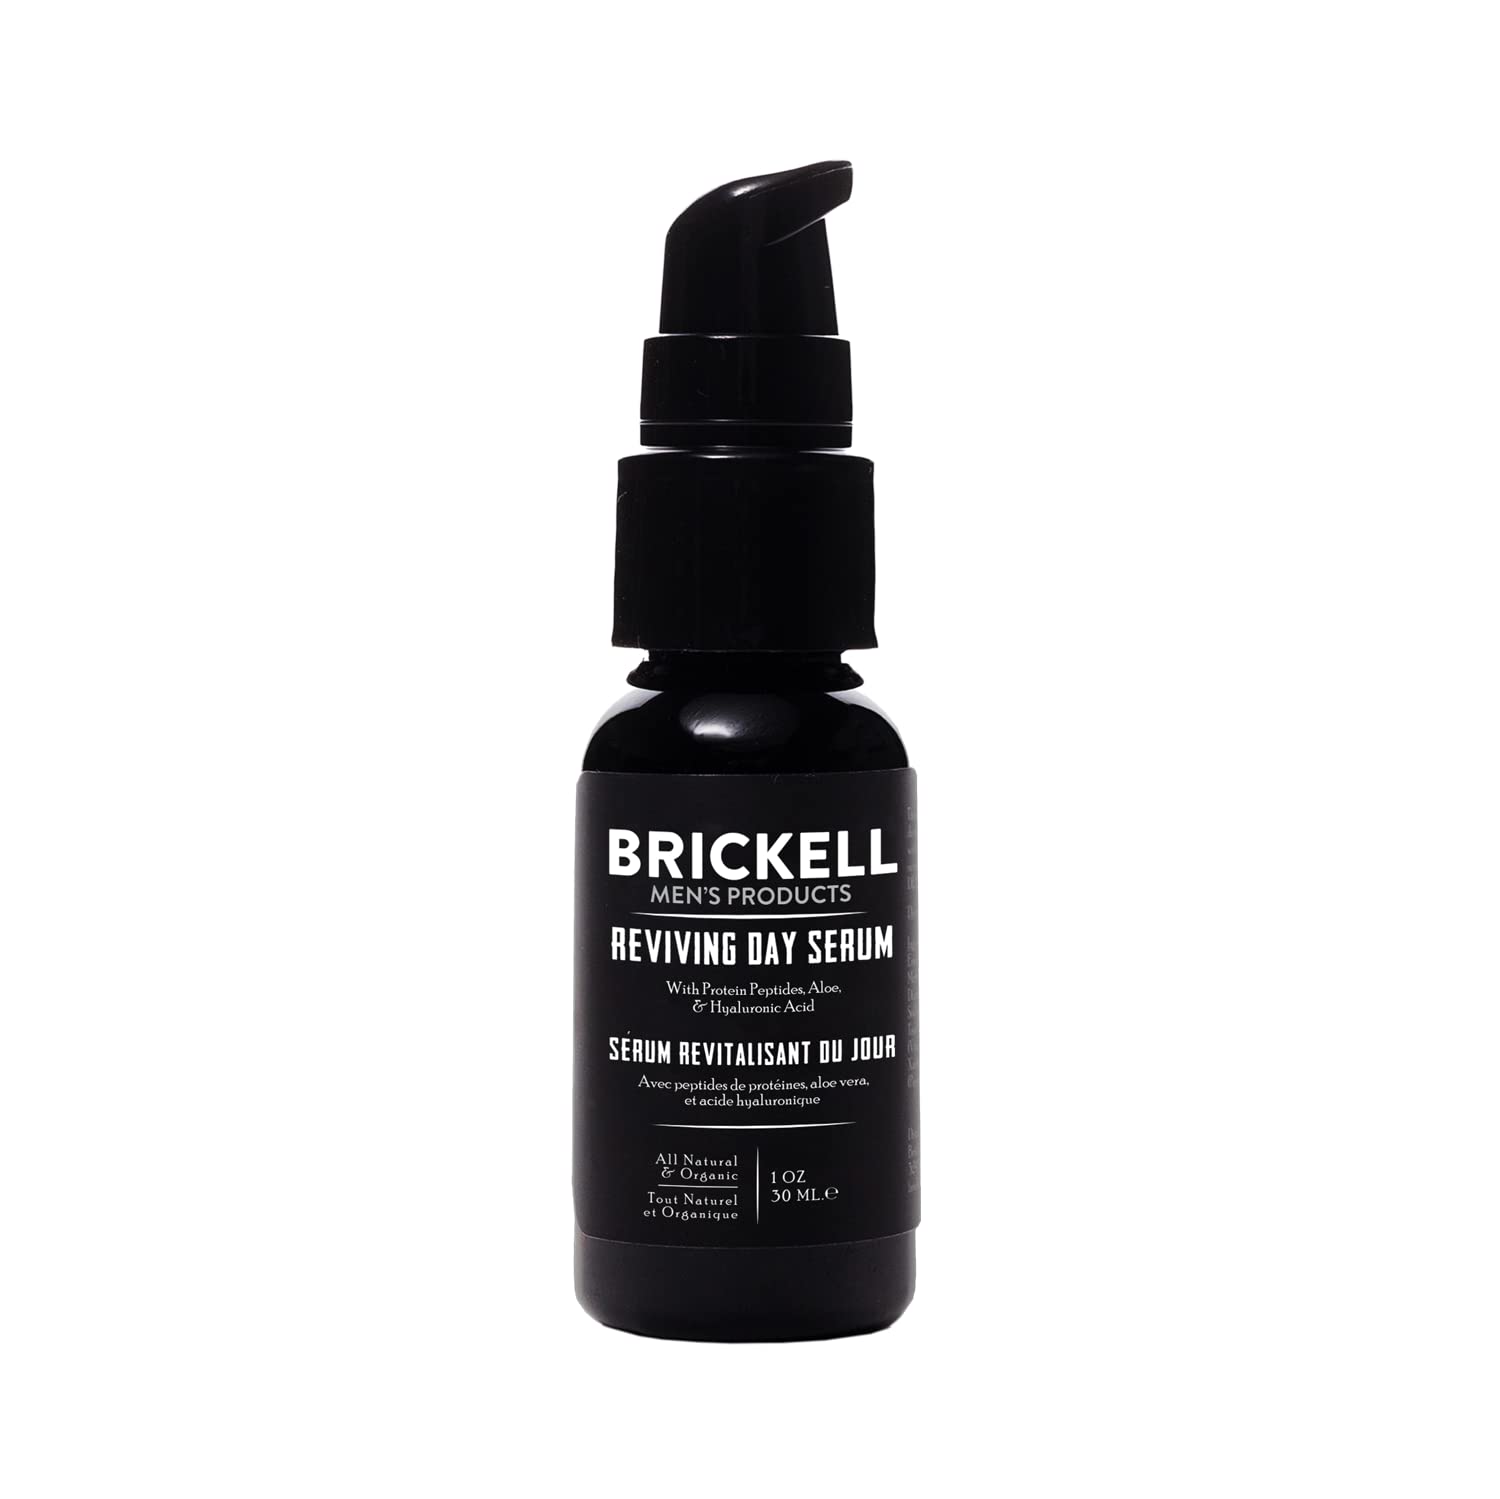 Brickell Mens Anti Aging Reviving Day Serum for Men, Natural and Organic Formulated with Hyaluronic Acid, Protein Peptides to Restore Firmness and Stimulate Collagen, 30 ml, Unscented